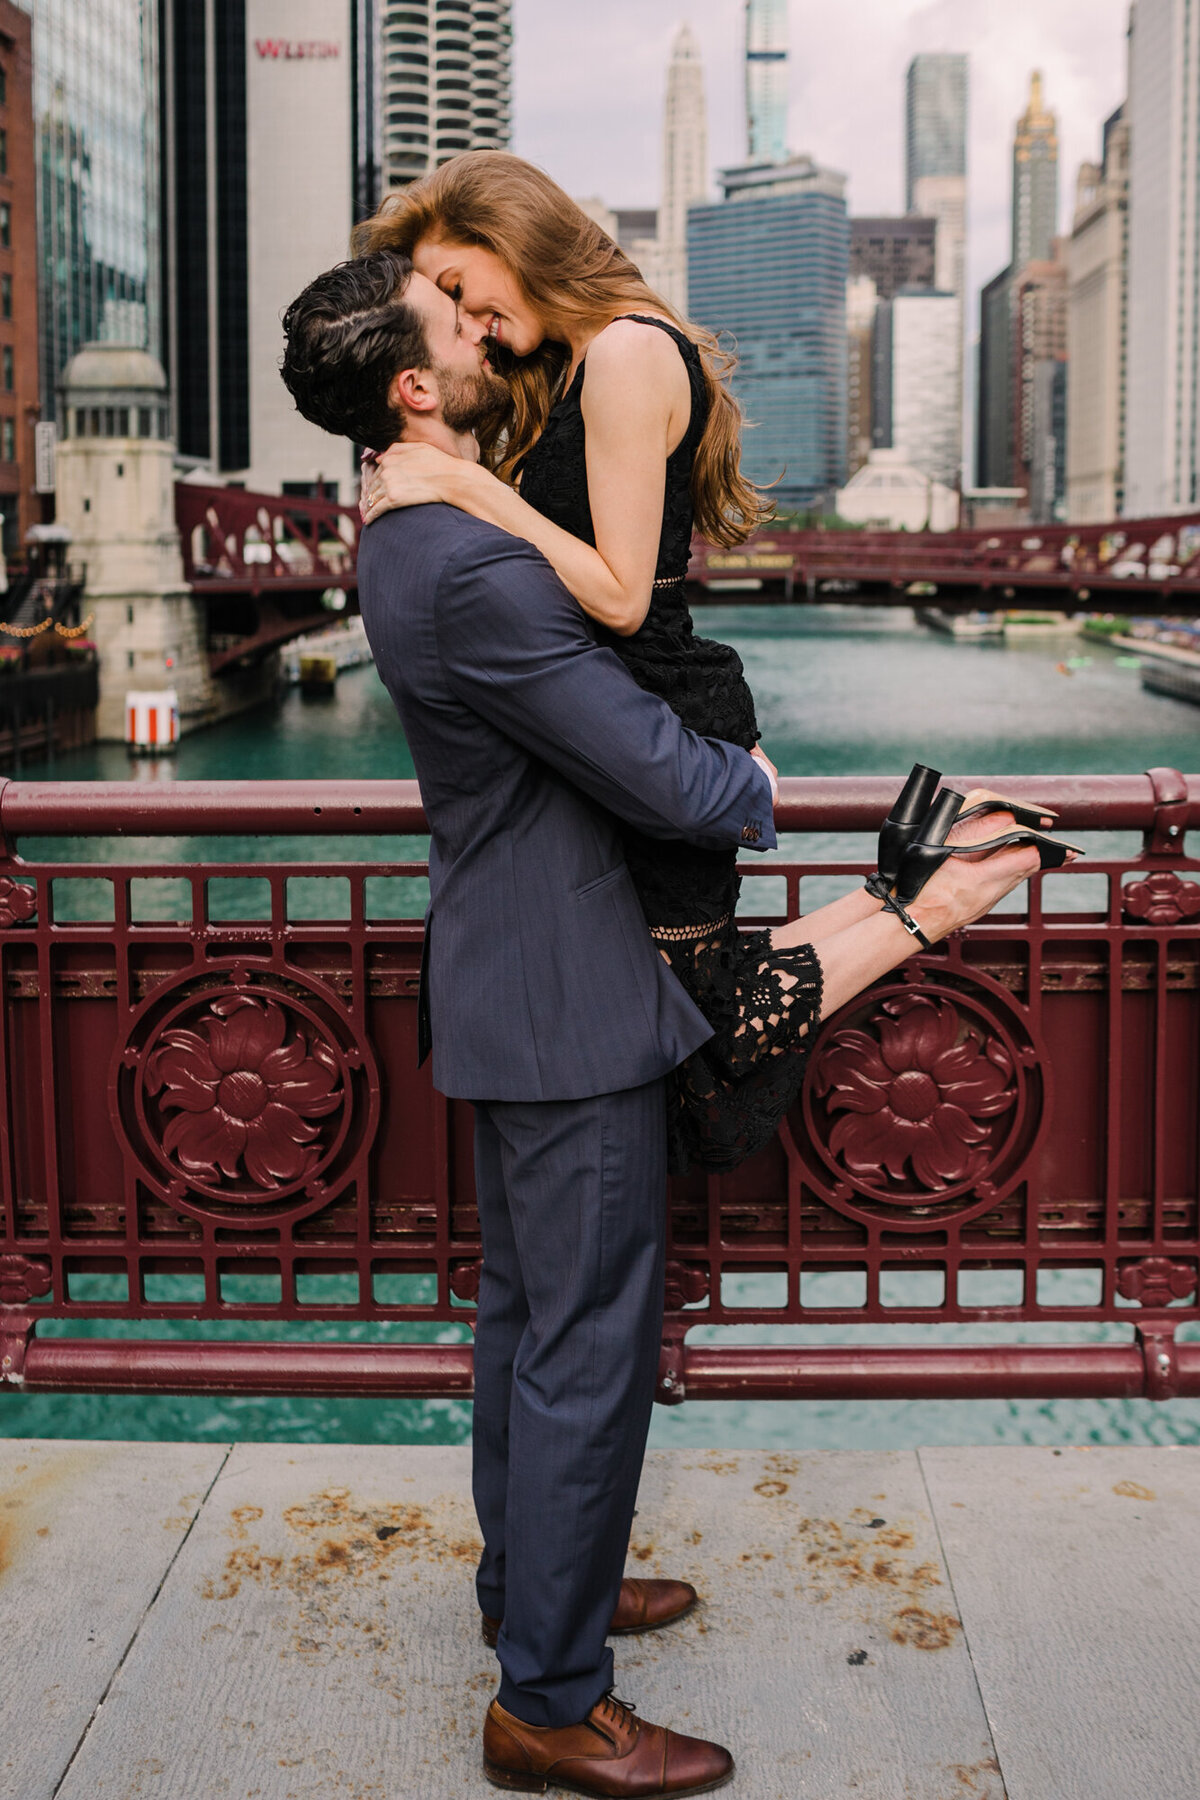 A candid moment along the LaSalle Street Bridge in Chicago